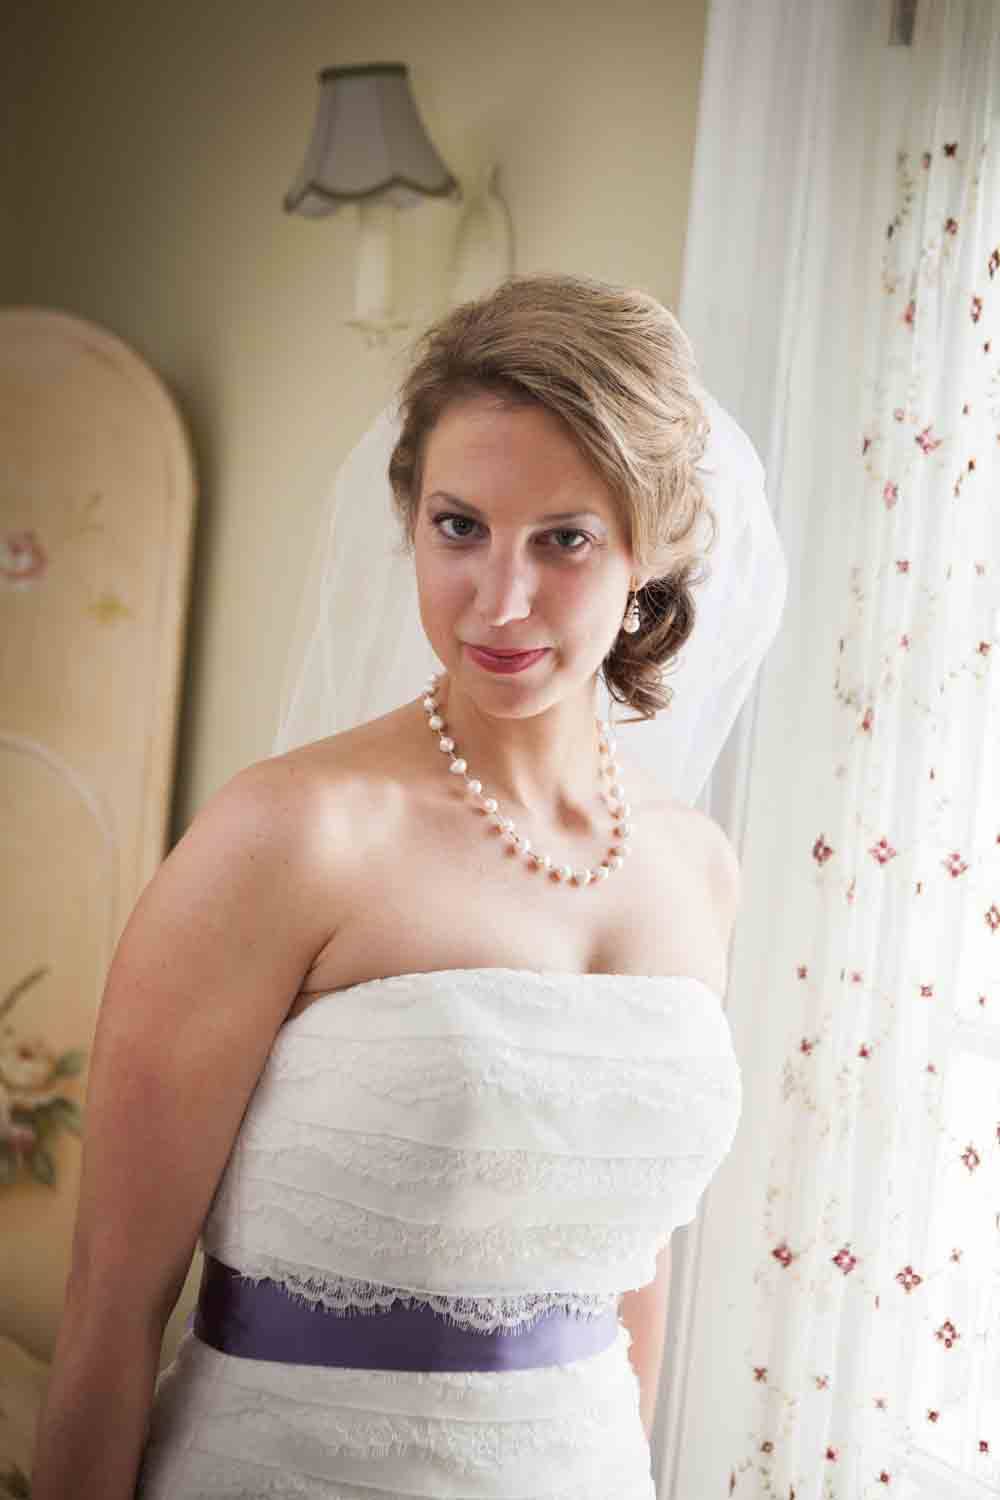 Portrait of bride with veil at a Davenport Mansion wedding